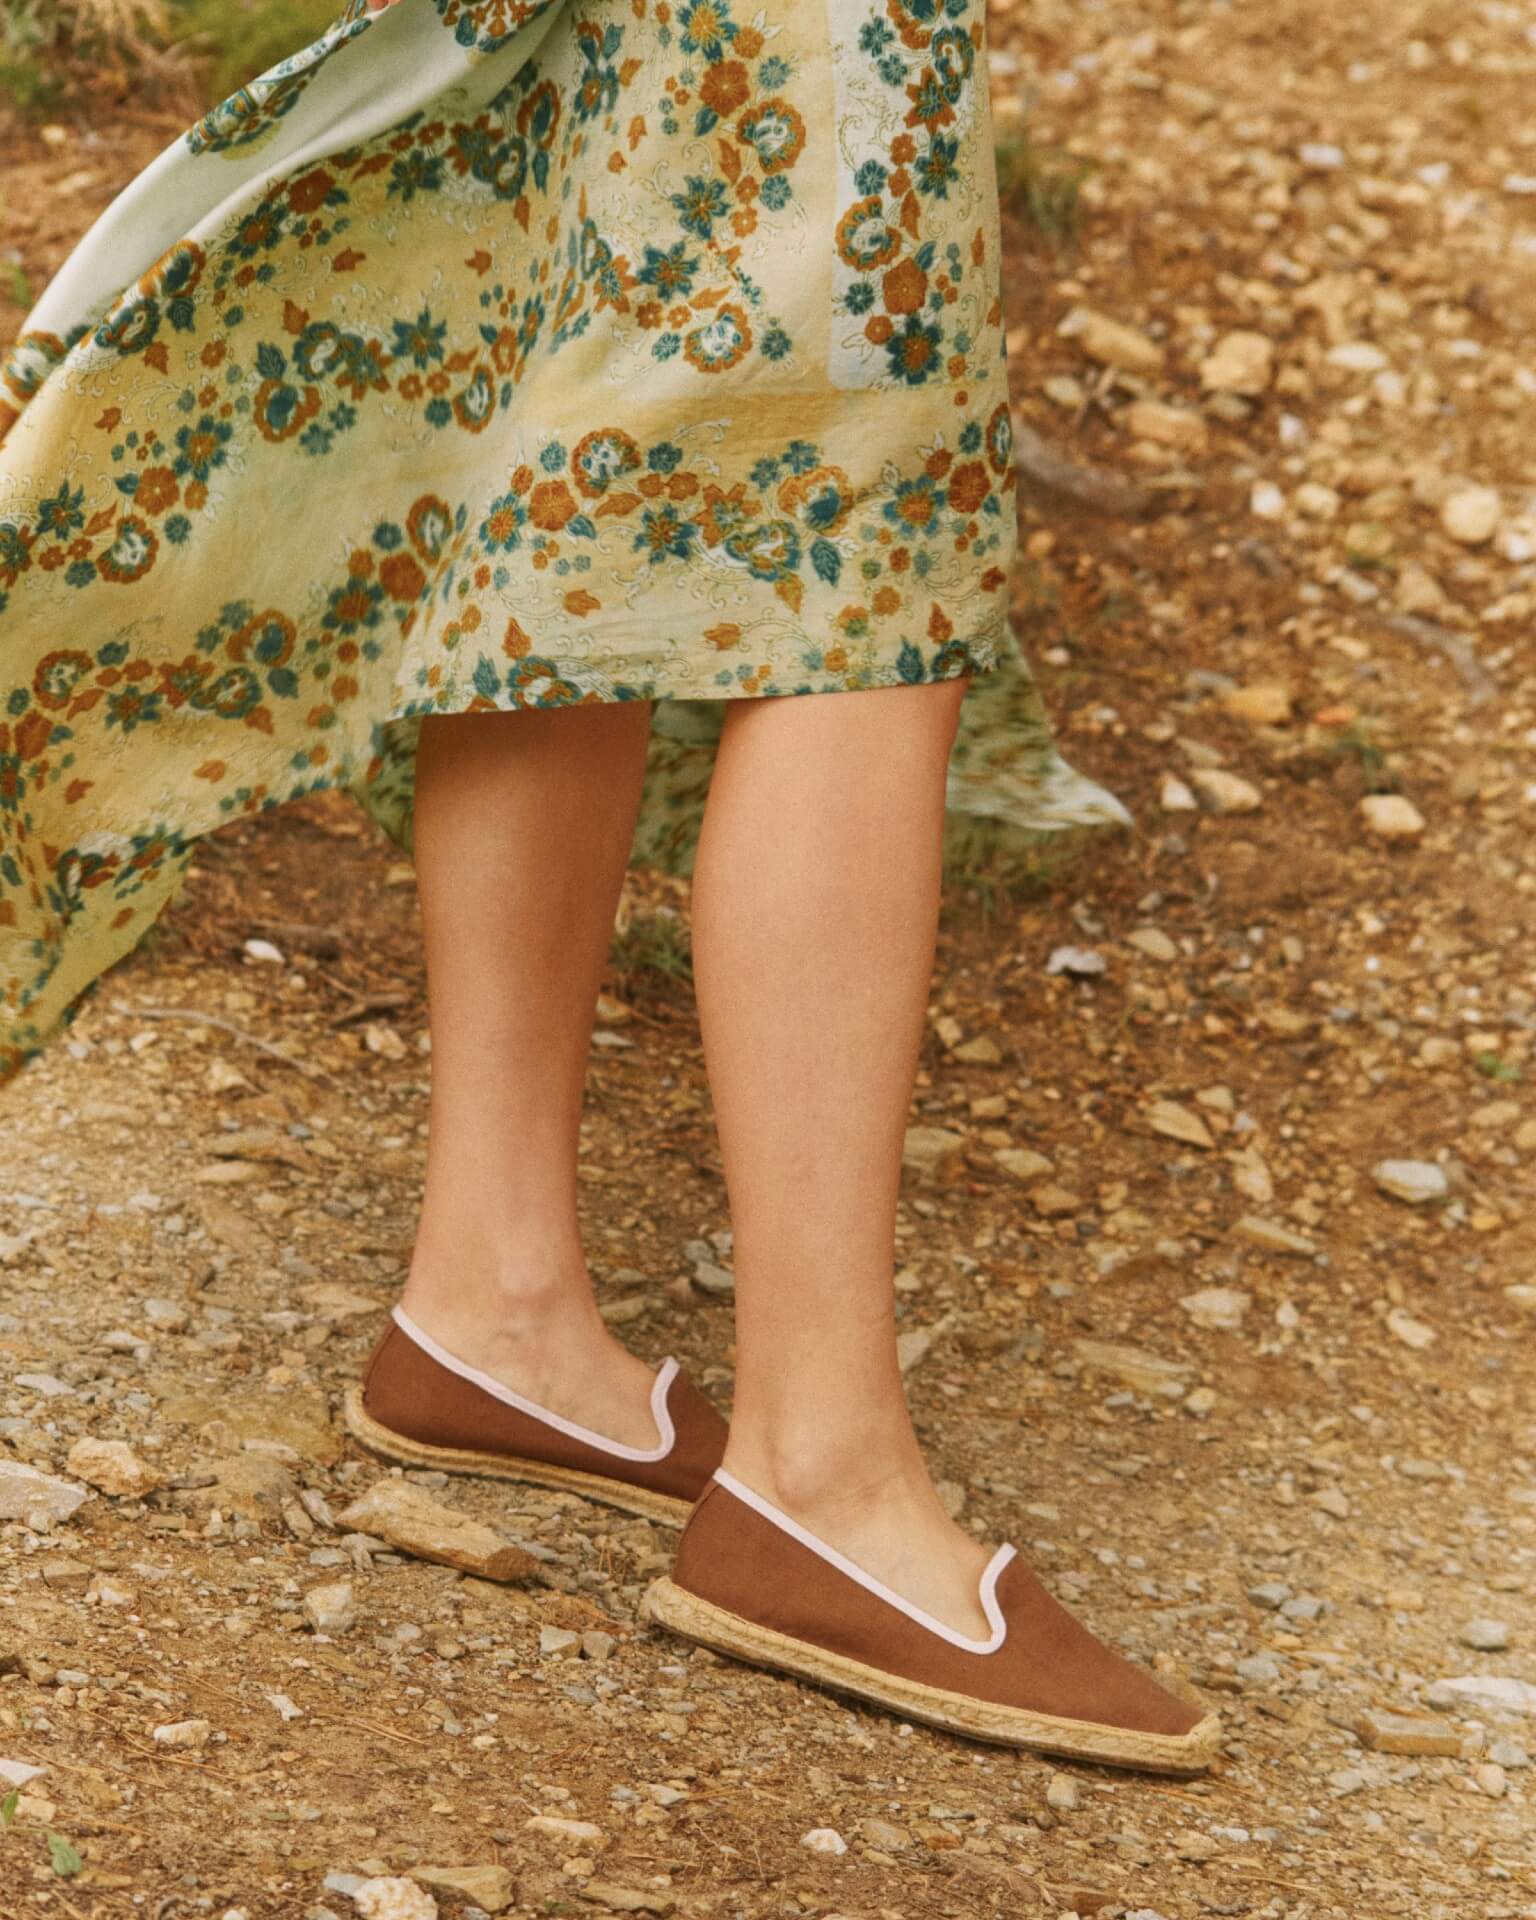 Adult woman wearing brown espadrilles with pink piping around it